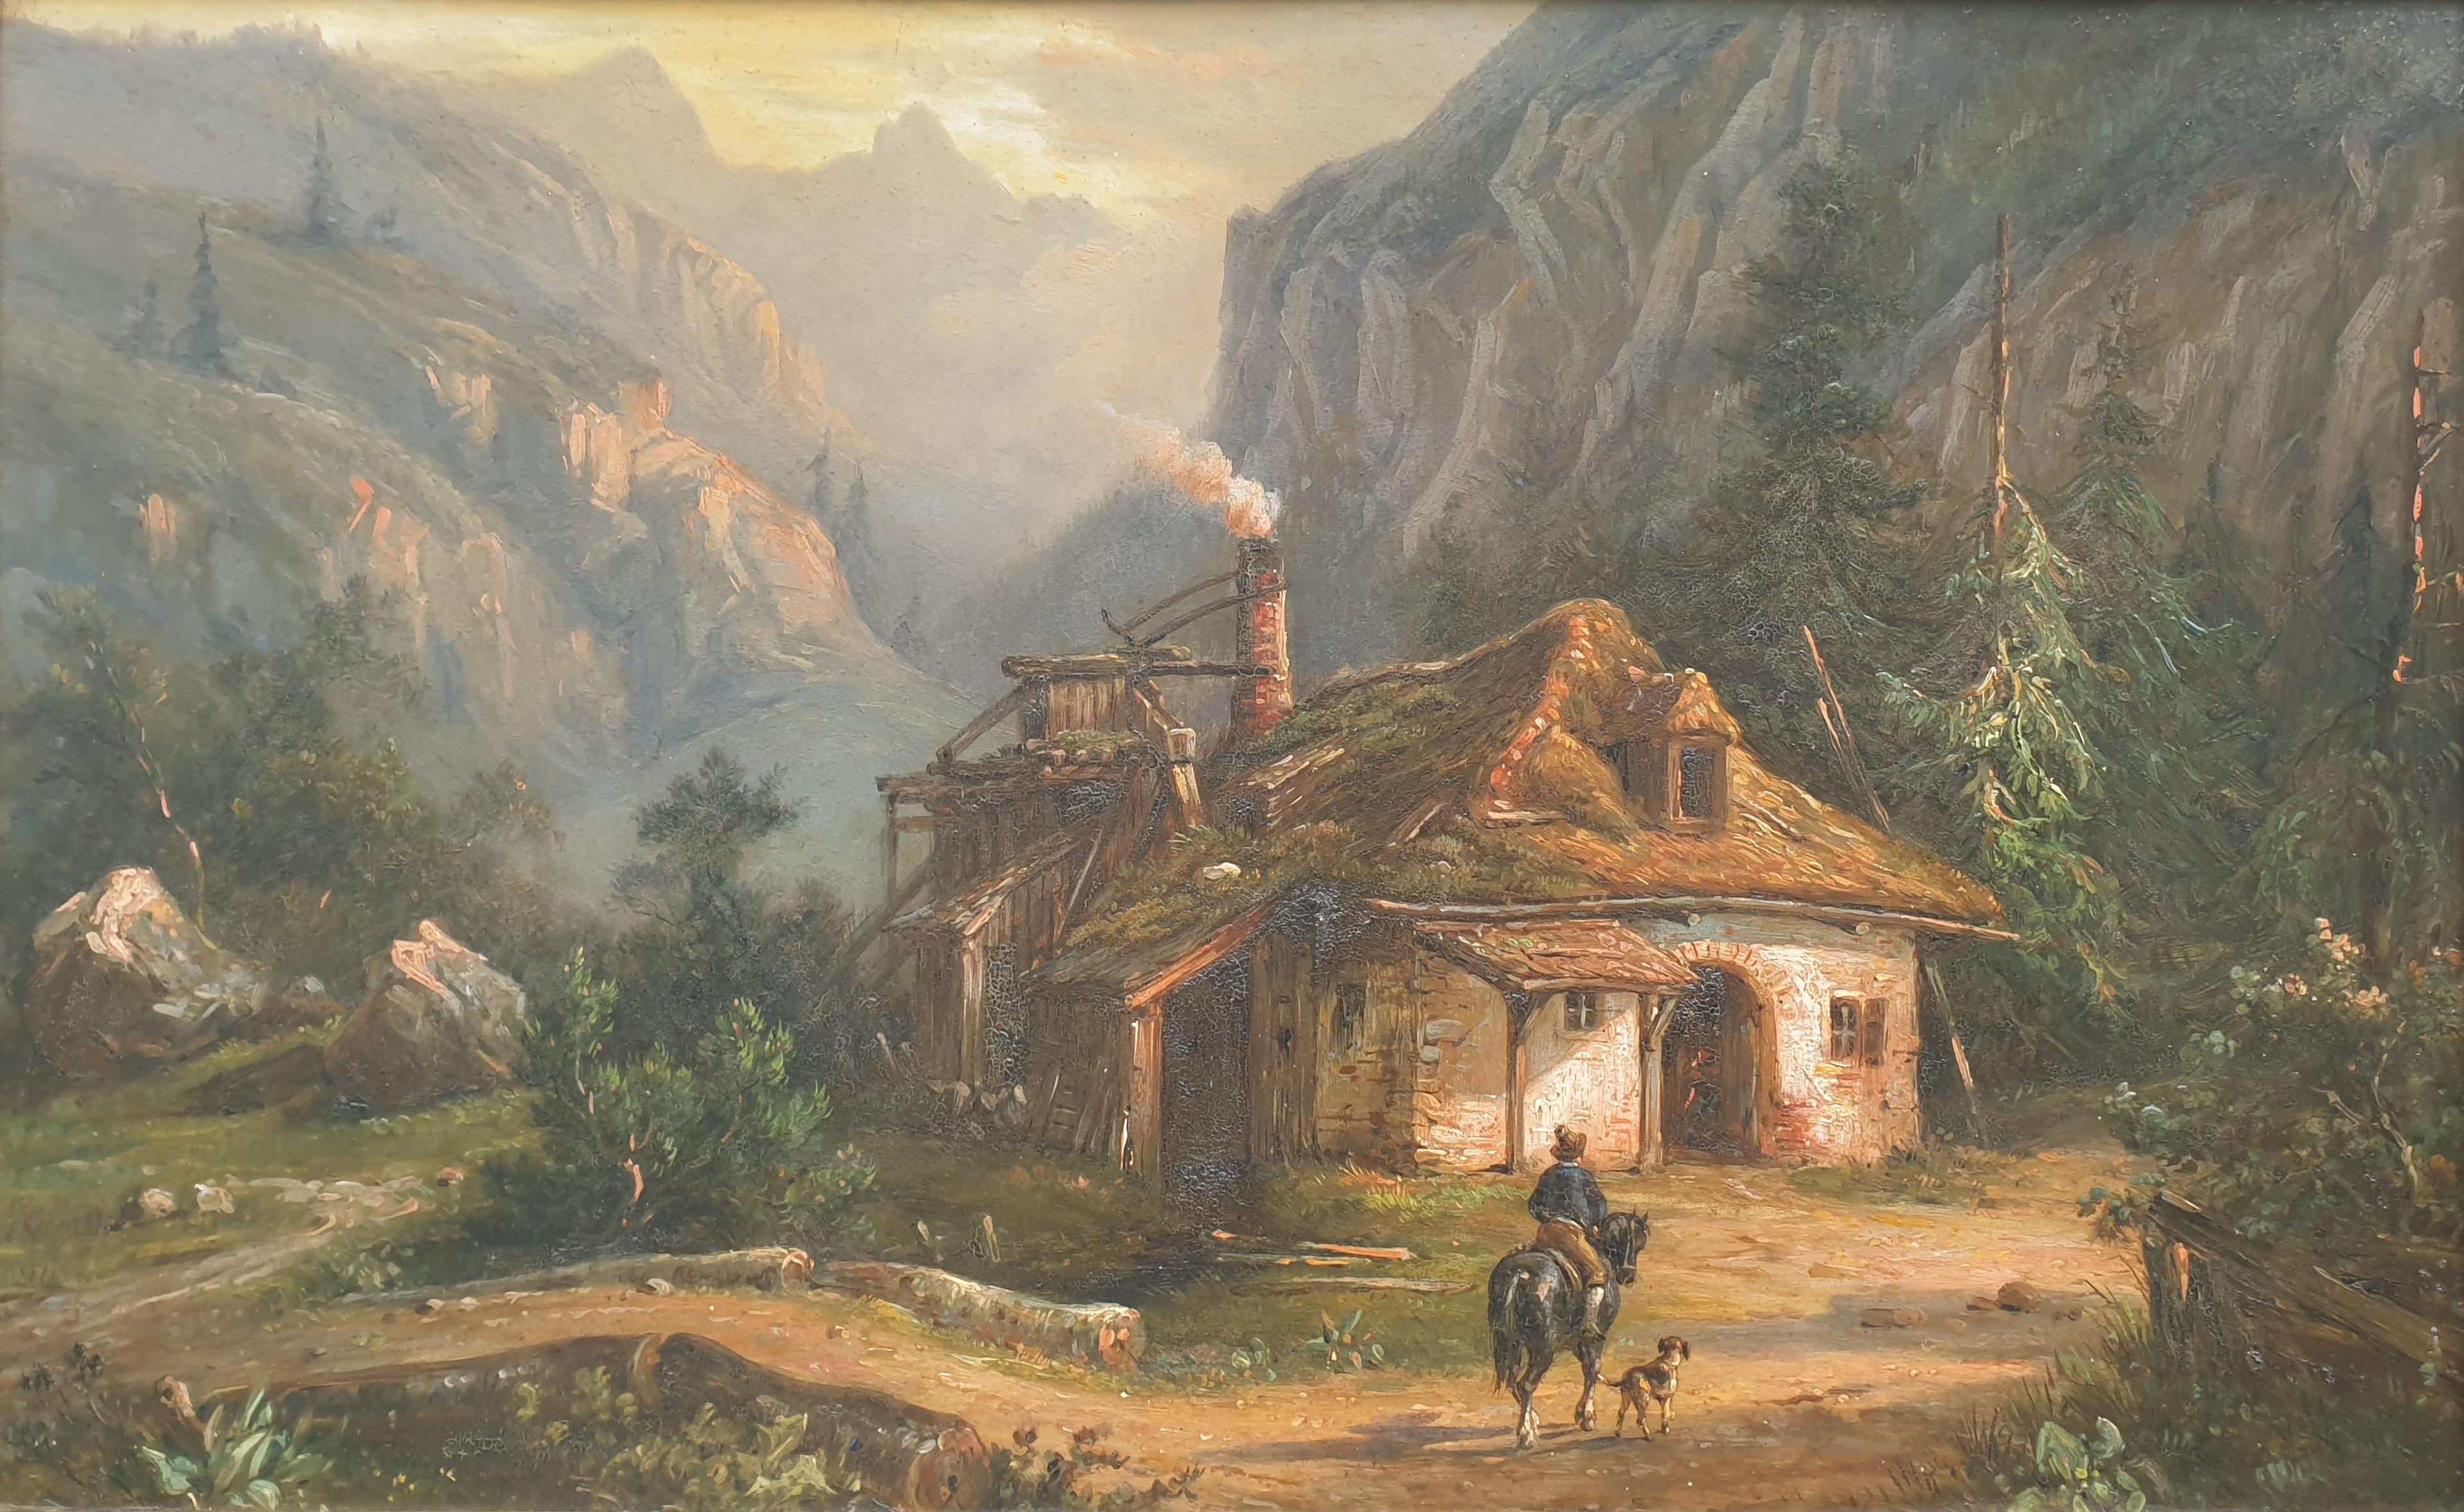 THOMASSIN Attributed Austrian landscapes romantic pair painting Brazil 19th   - Painting by Desiré Thomassin